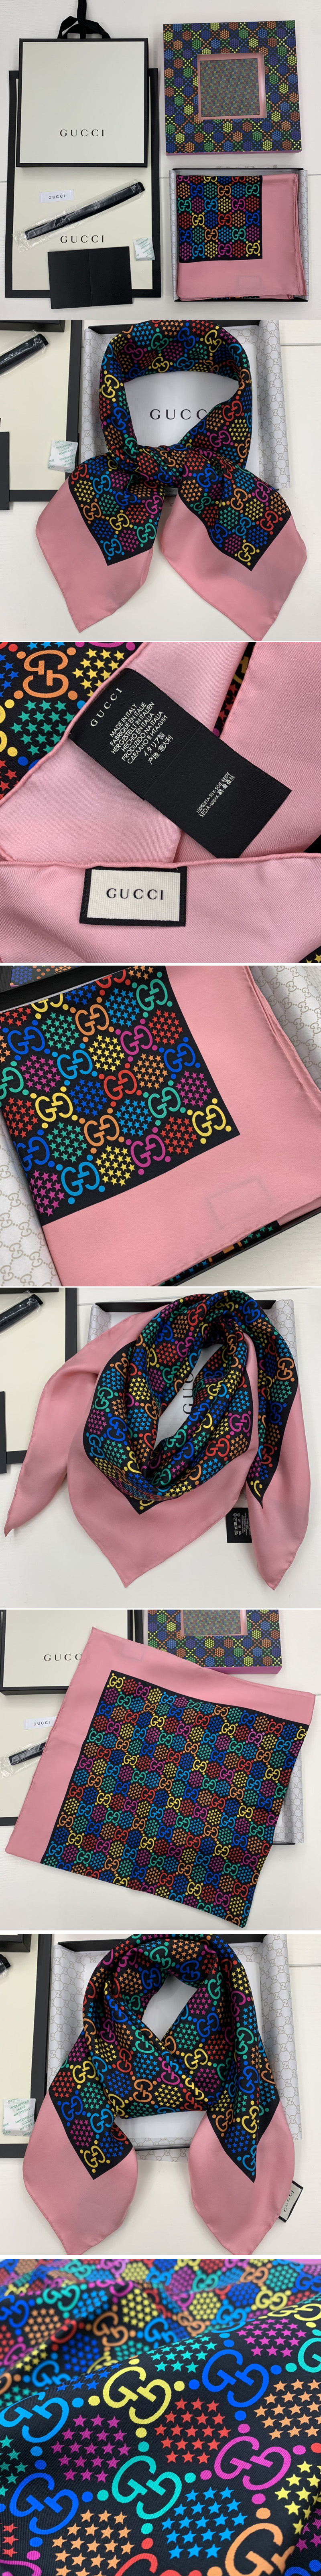 Replica Gucci 601309 GG Psychedelic print silk scarf in Pink